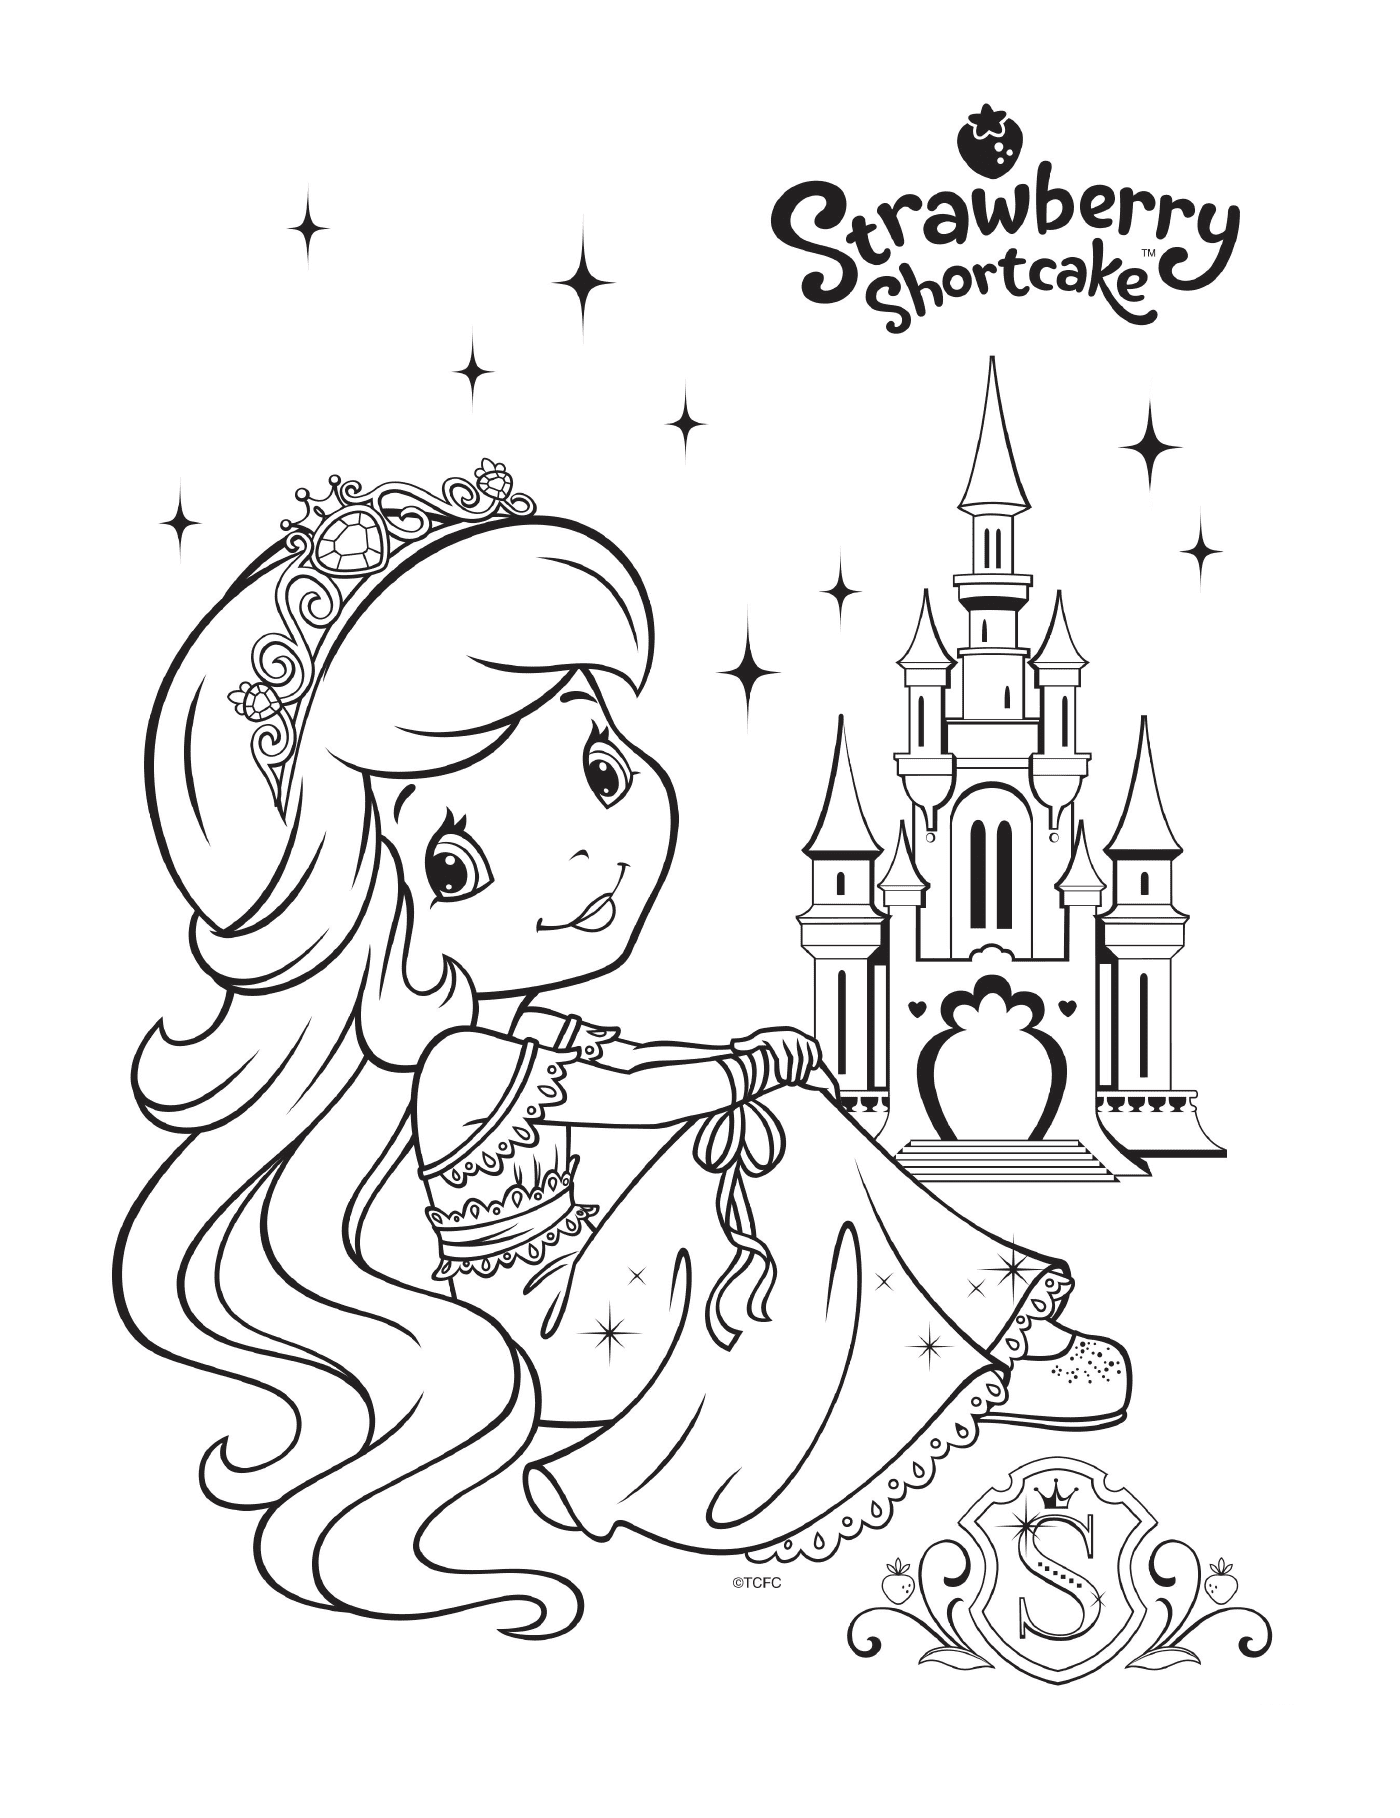  Princess Strainette and her enchanted kingdom 